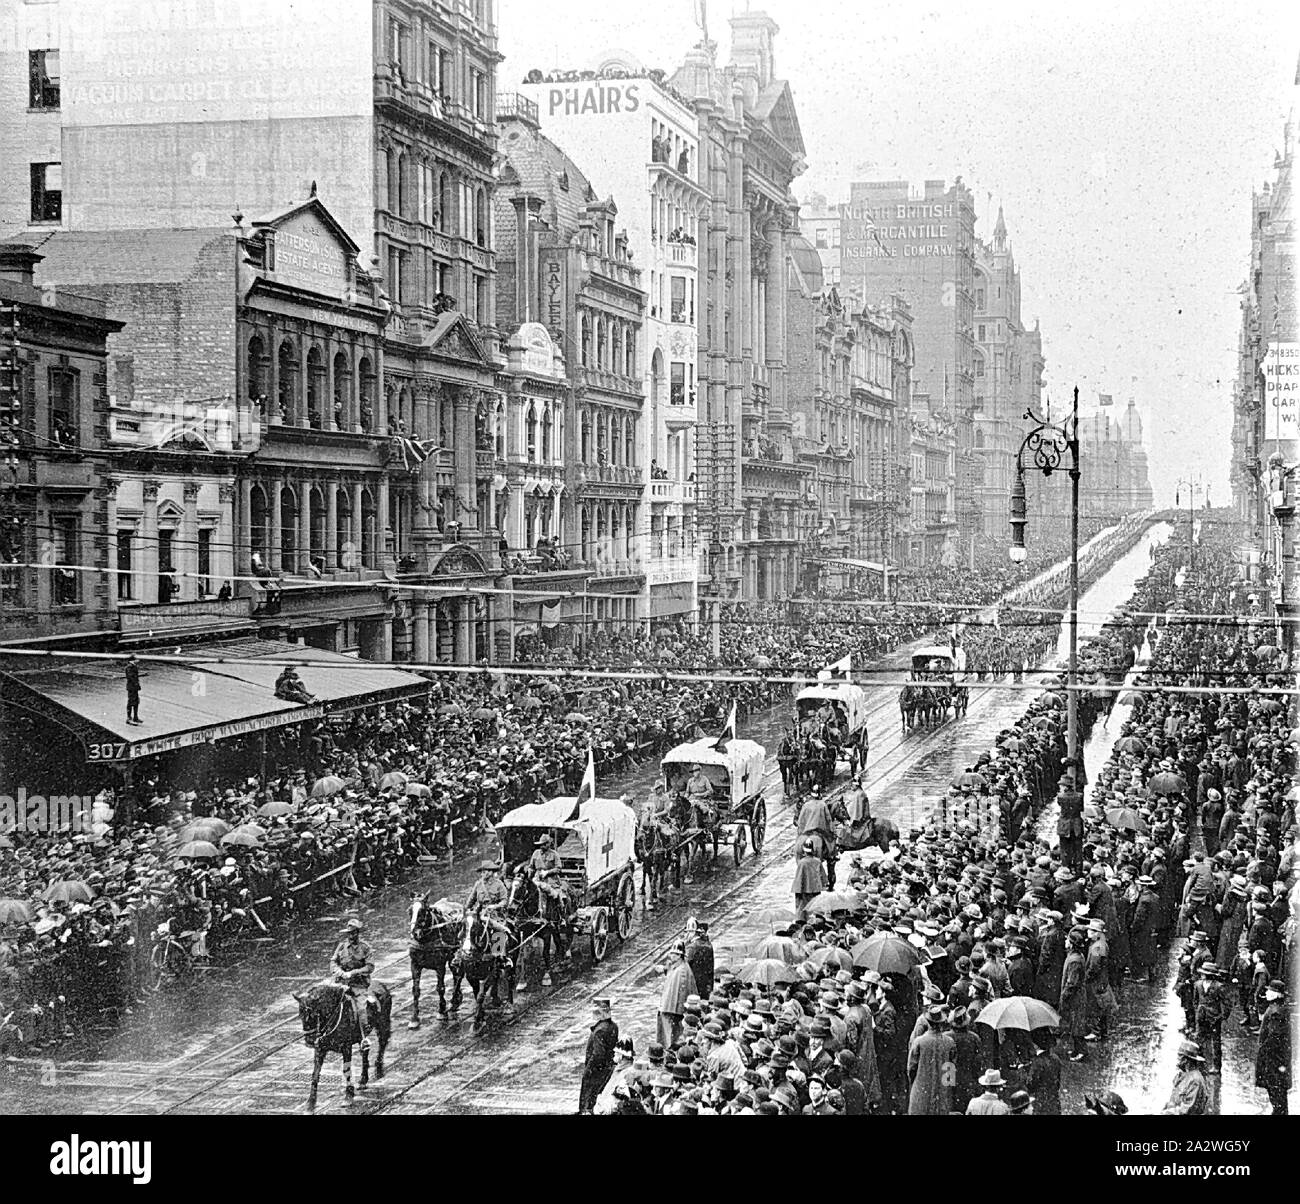 Negative - Horse Drawn Ambulances Leading a Parade of Soldiers, Swanston Street, Melbourne, Victoria, 1914, Horse-drawn ambulances leading a parade of soldiers Stock Photo